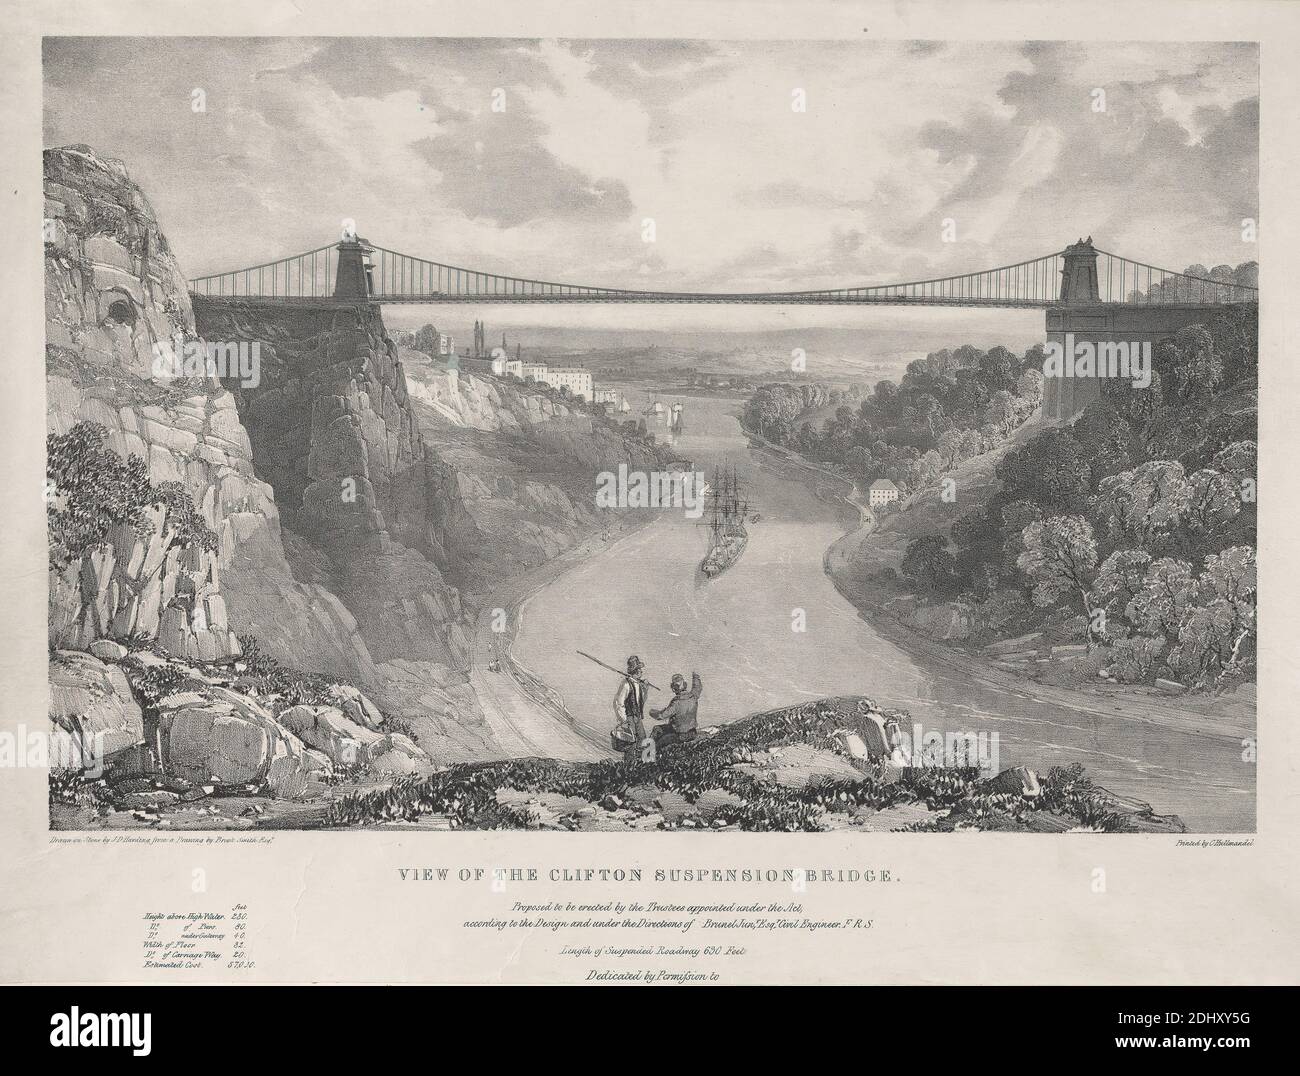 View of the Clifton Suspension Bridge, James Duffield Harding, 1798–1863, British, after unknown artist, (Brook Smith), Printed by Charles J. Hullmandel, 1789–1850, British, undated, Lithograph on moderately thick, slightly textured, beige wove paper with gray chine collé, Sheet: 15 9/16 x 21 3/16 inches (39.6 x 53.8 cm), Sheet: 14 1/16 x 18 3/4 inches (35.7 x 47.7 cm), and Image: 11 5/16 x 17 5/16 inches (28.8 x 44 cm), architectural design, architectural subject, beach, boat, bridge (built work), bucket, buildings, city, cliffs, landscape, men, pail, paths, river, rocks (landforms), sailboat Stock Photo